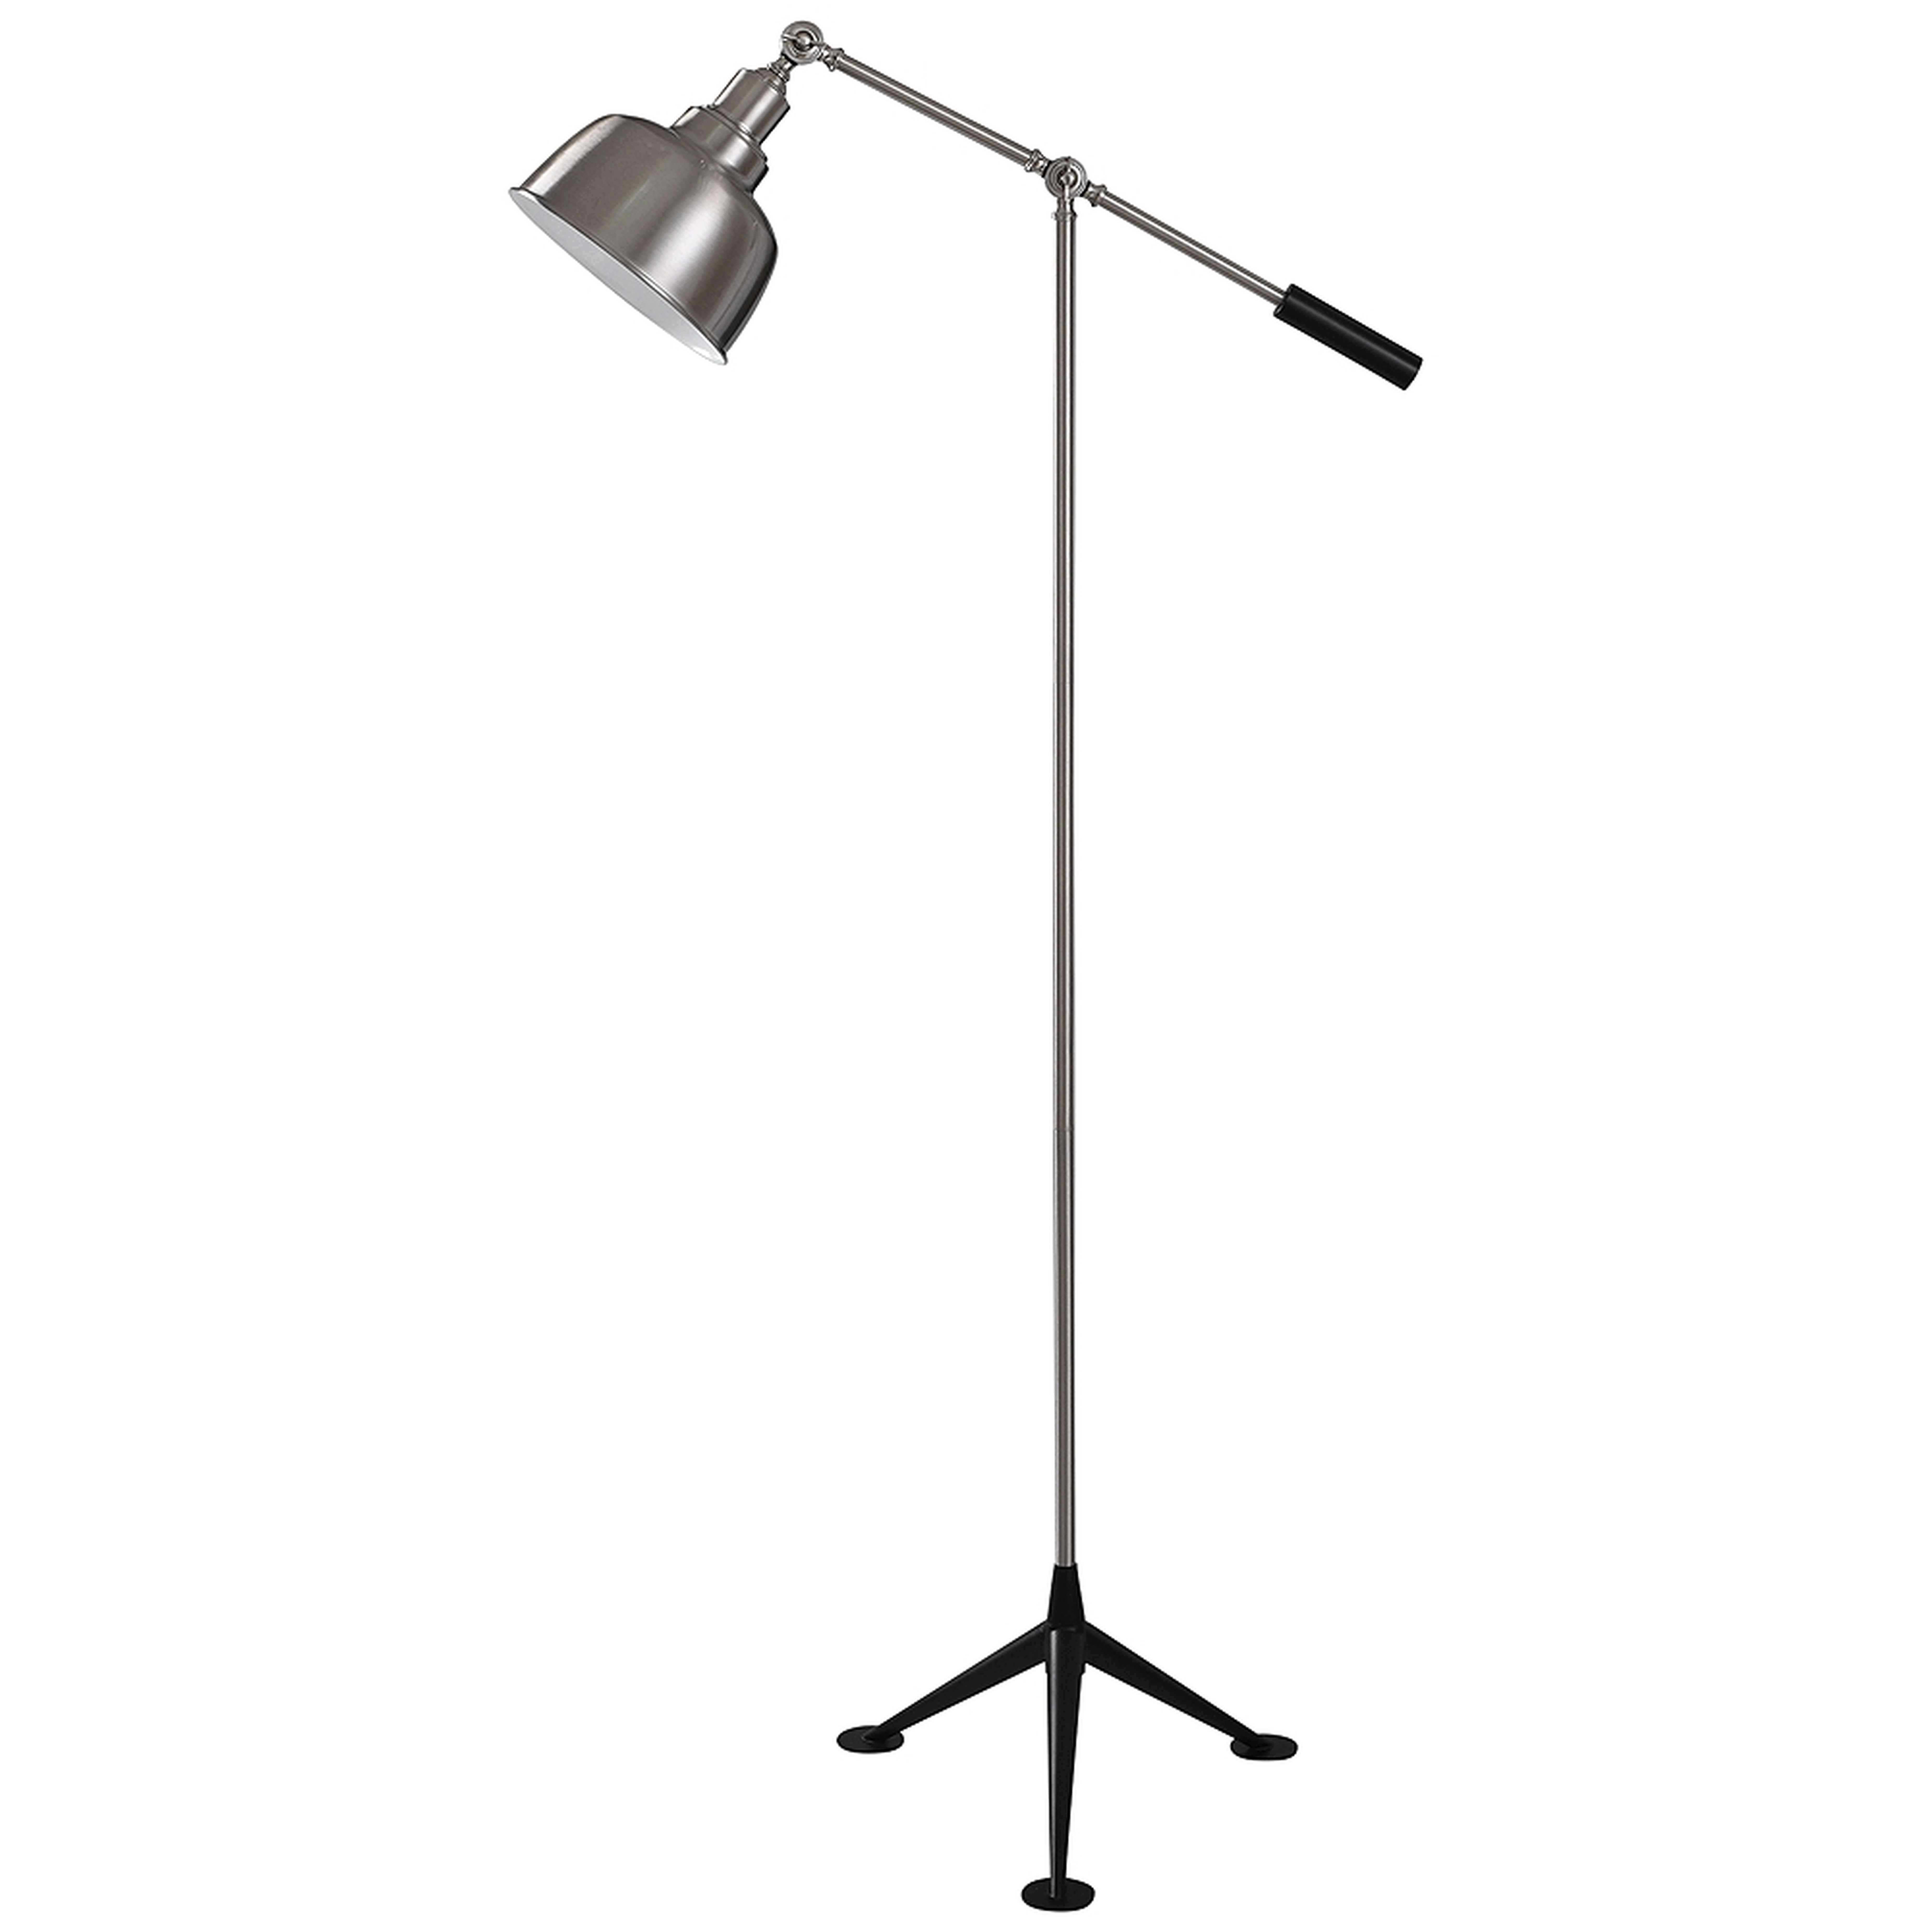 Blackburn Black and Brushed Steel Balance Arm Floor Lamp - Style # 69A68 - Lamps Plus